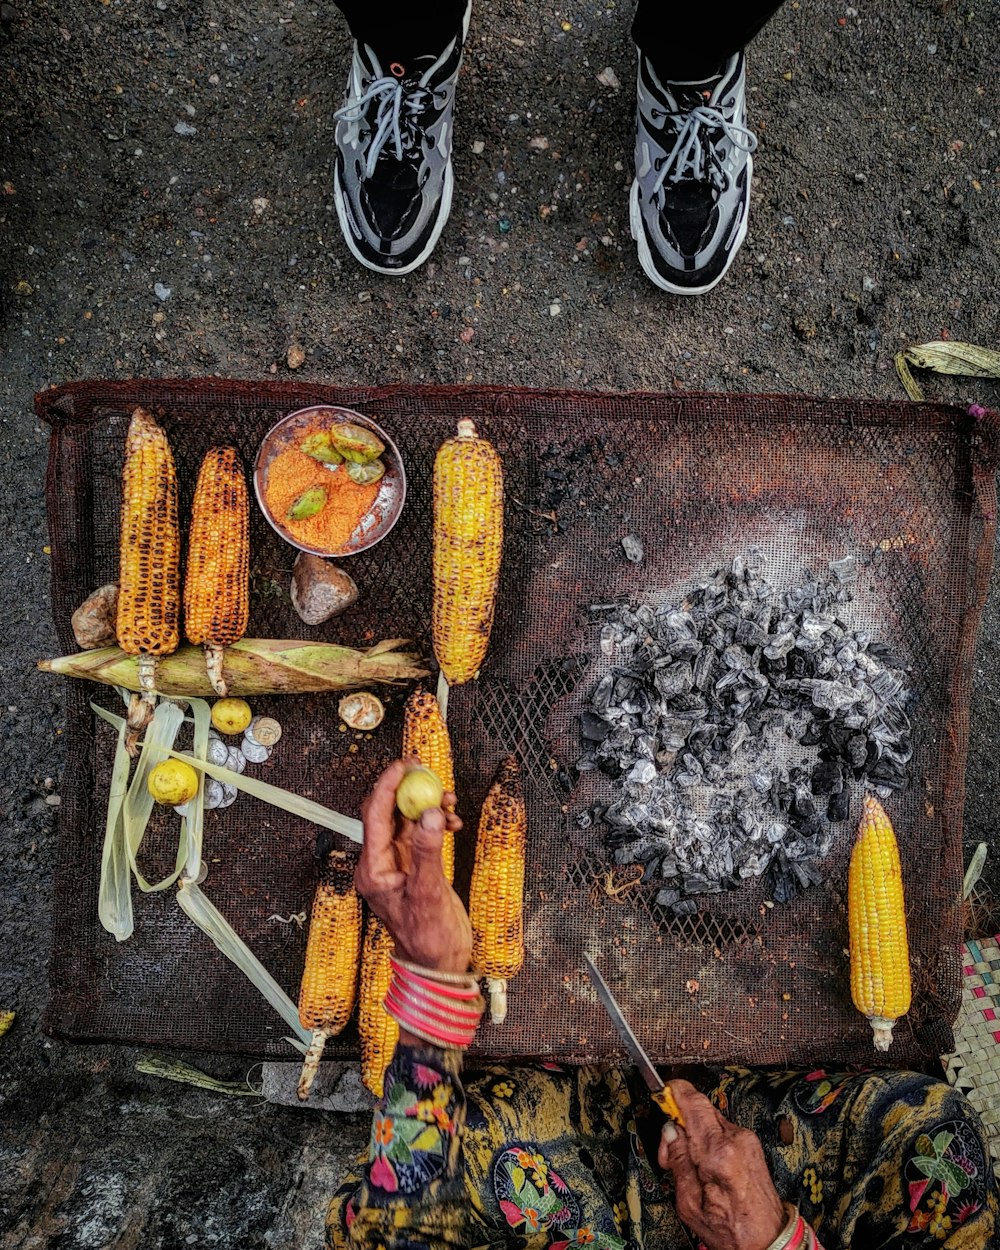 a person is preparing food on a grill